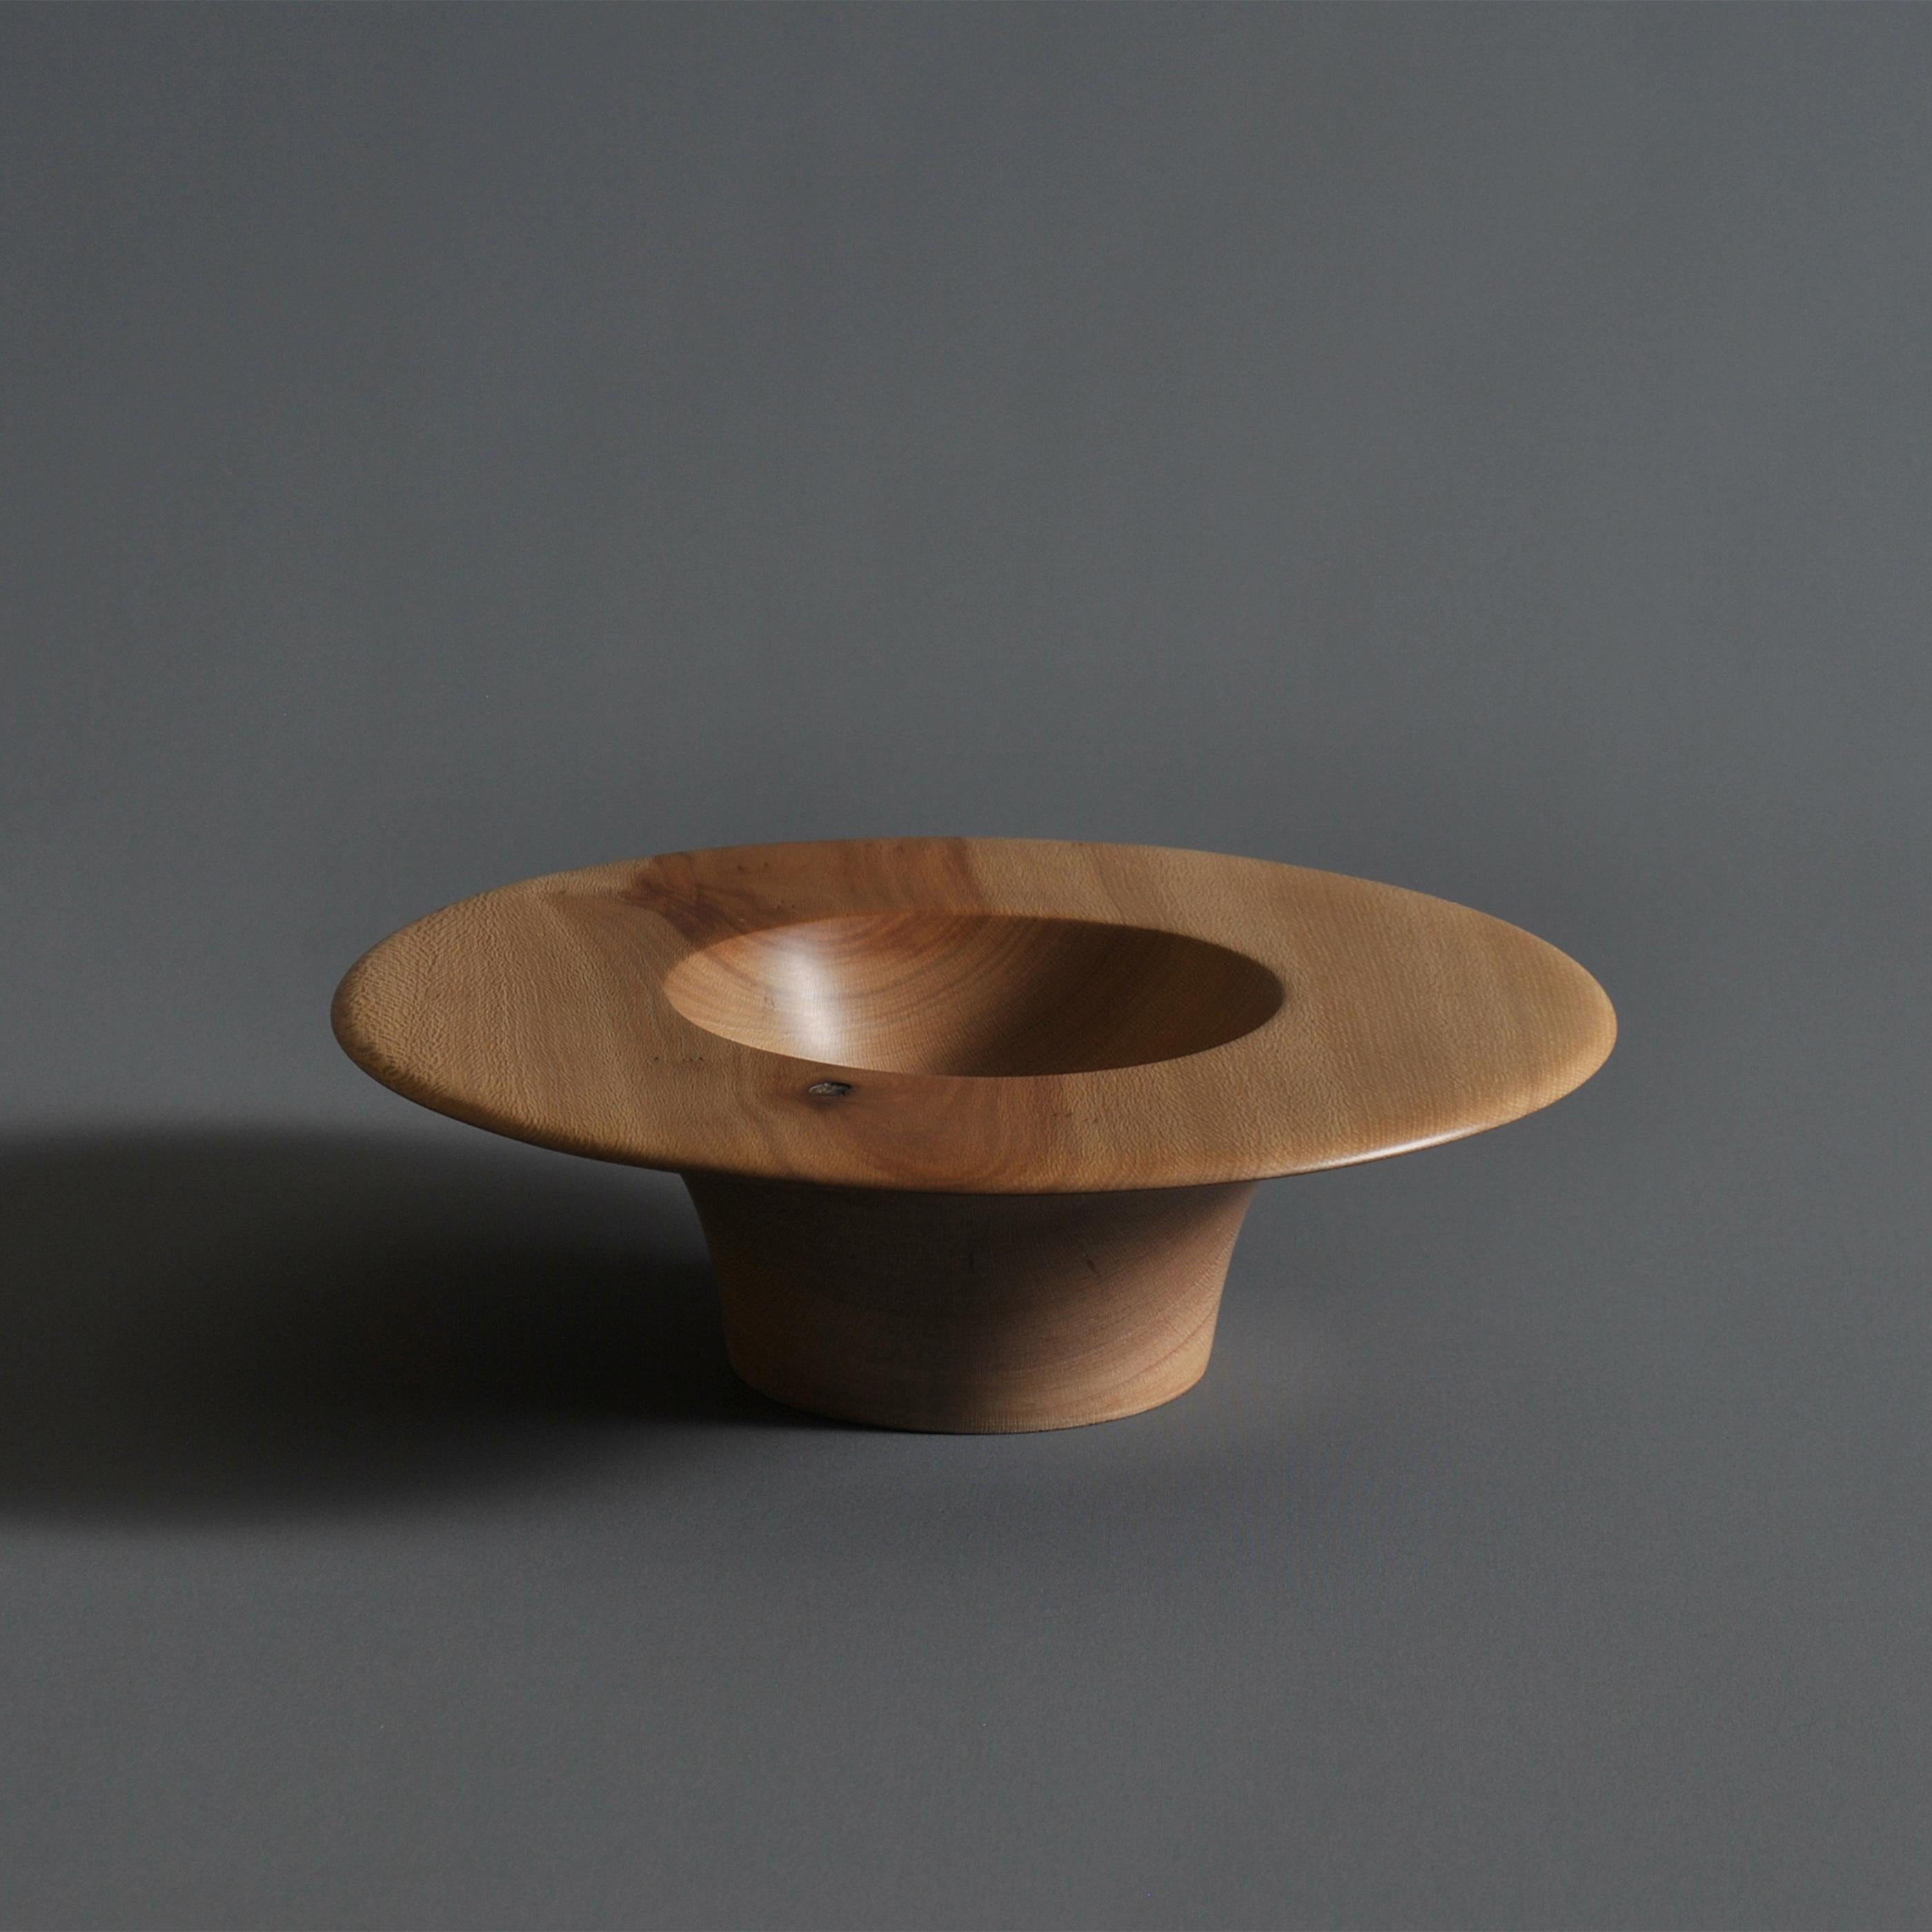 Hand-Crafted Handcrafted Turned London Plane Bowl For Sale